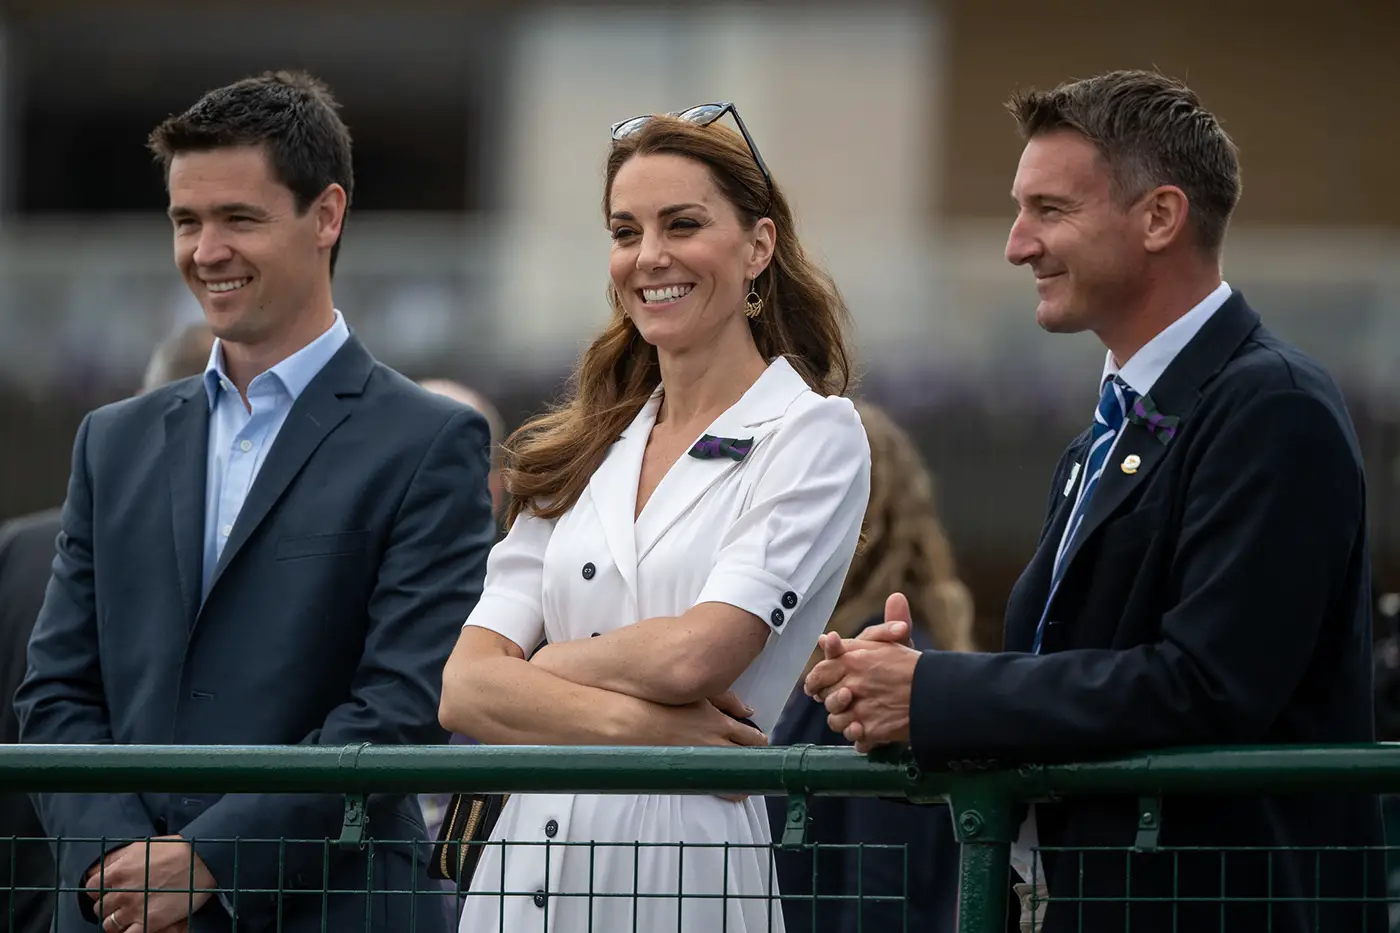 Duchess of Cambride visited Wimbledon as the patron of the Lawn Tennis wearing white suzannah dress